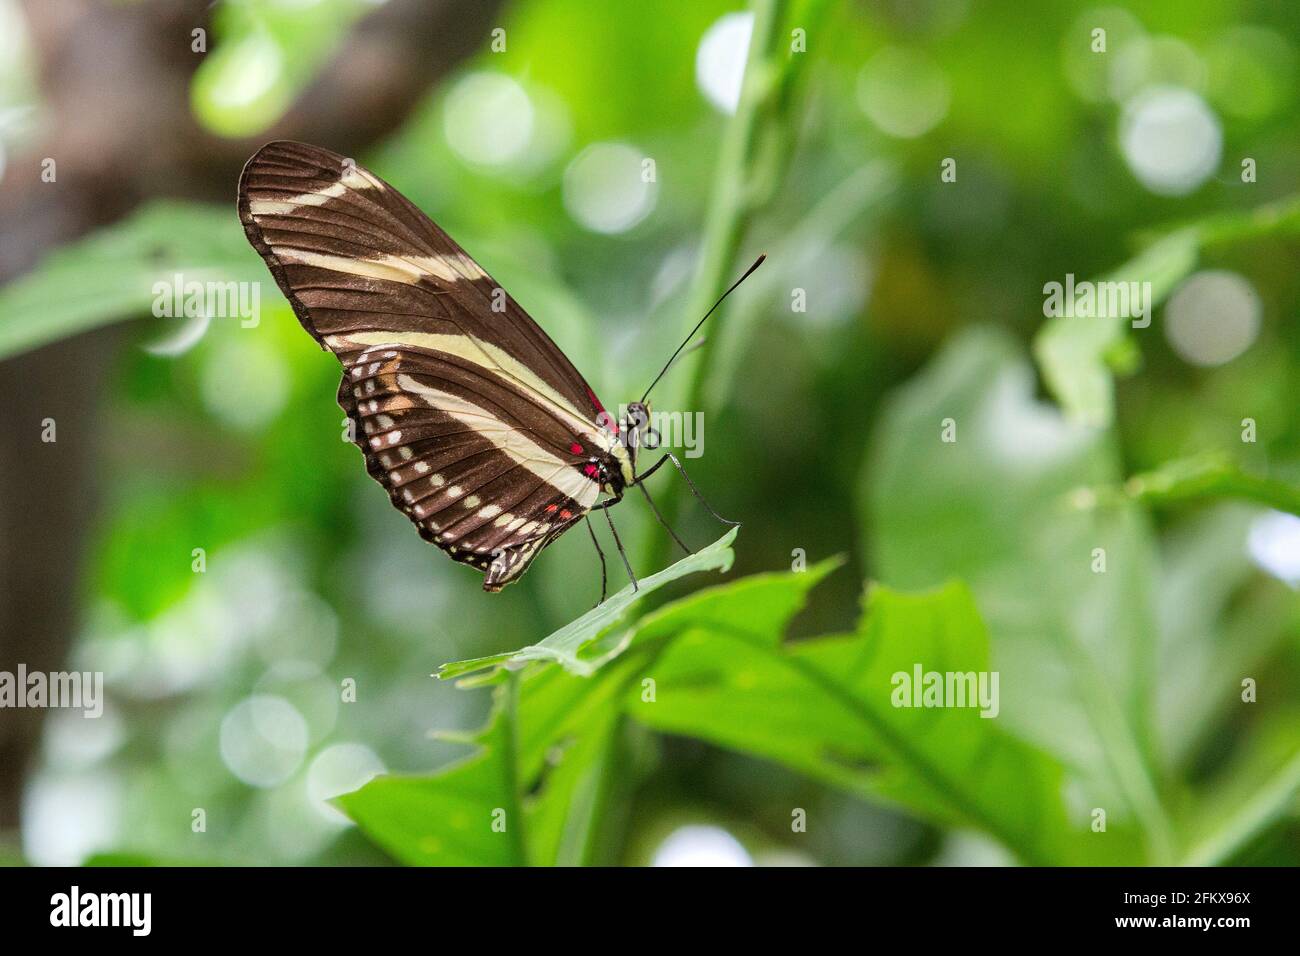 Zebra Butterfly, Heliconius charithonia, Noble Butterfly Foto Stock